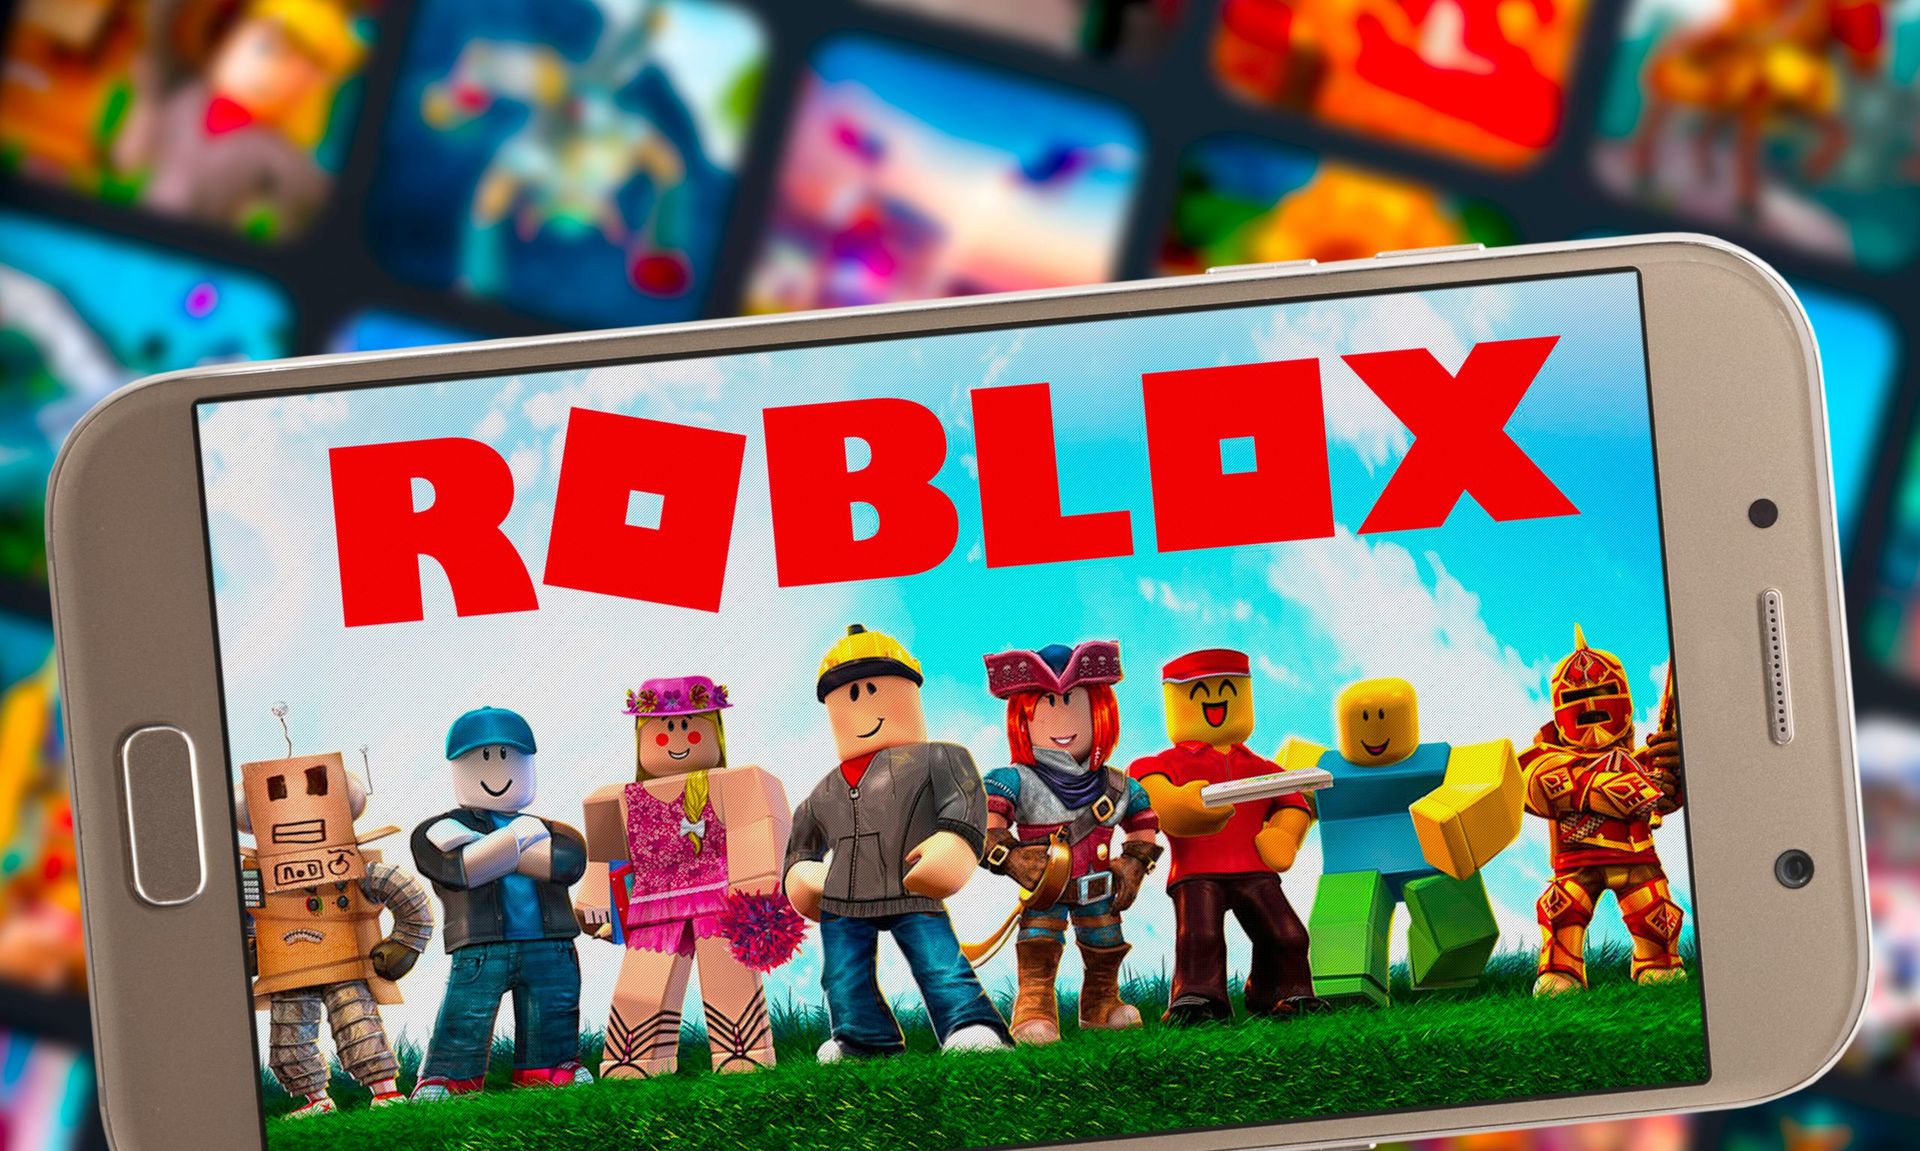 Today we are here to explain how to appear offline on Roblox. Some players are asking if they can you play Roblox offline. Do you know How to change privacy settings or how to edit your following options on Roblox? We explain everything in detail below.